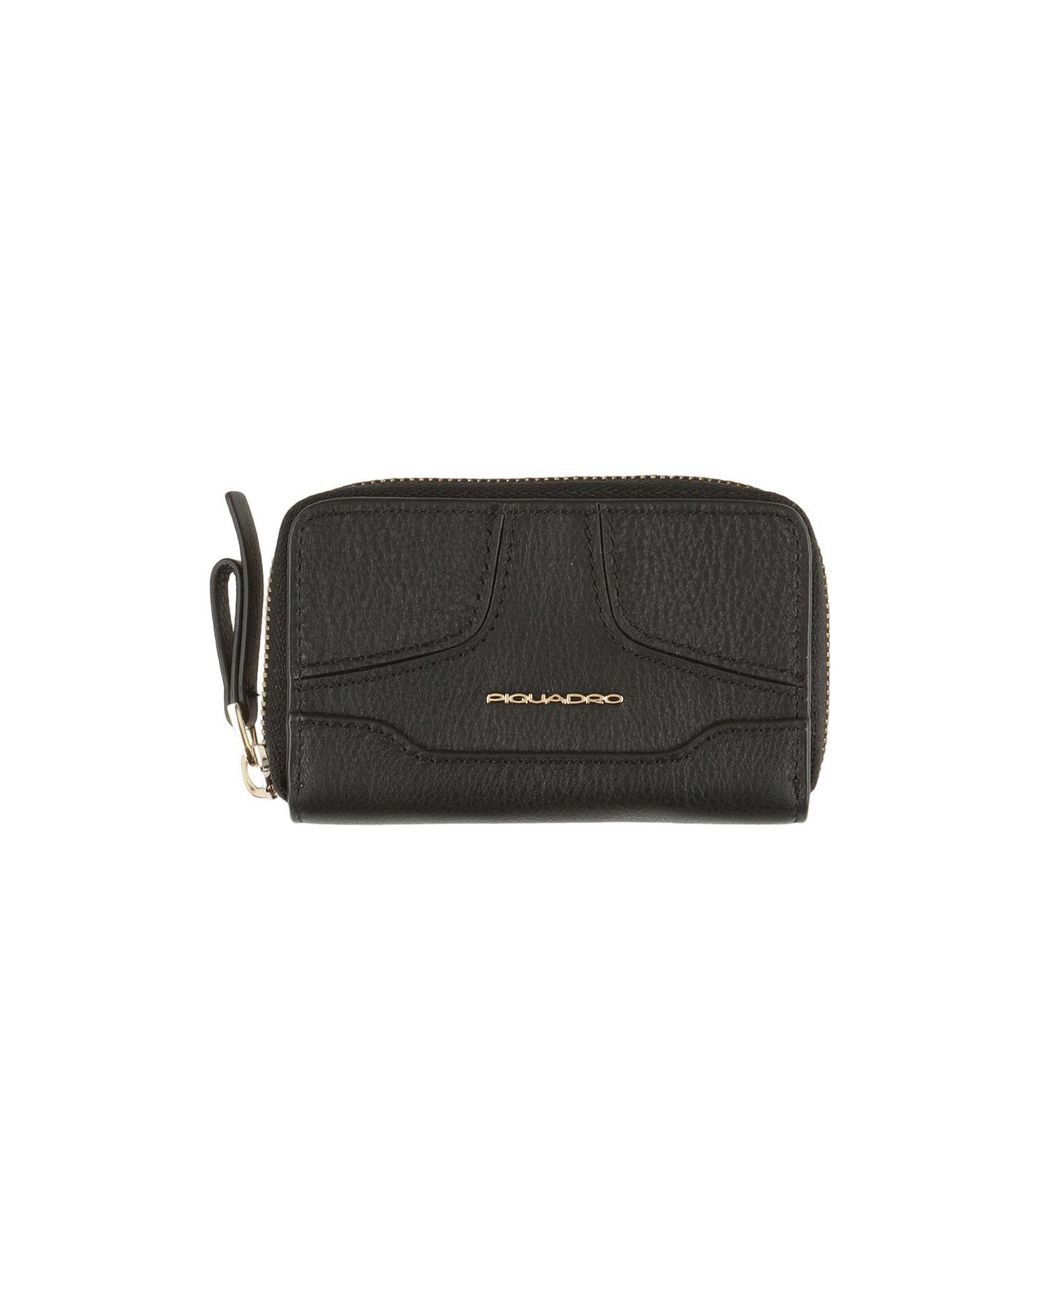 Piquadro Leather Wallet in Black | Lyst